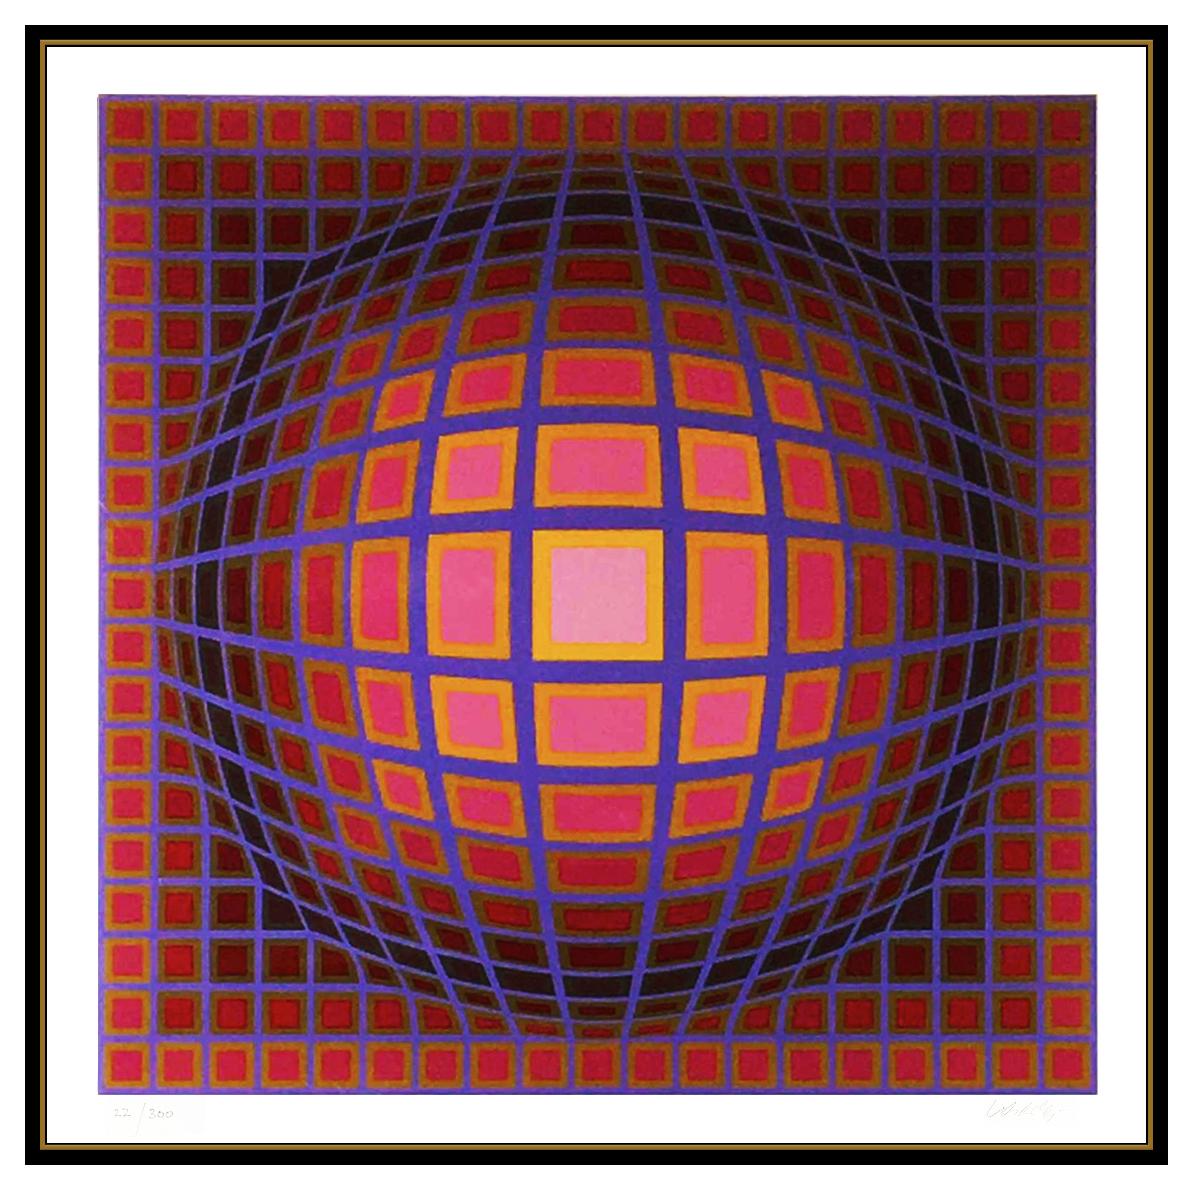 Victory Vasarely Authentic and Original Color Screenprint, Professionally Custom Framed and listed with the Submit Best Offer option

Accepting Offers Now:  Up for sale here we have an Extremely Rare, Screenprint by Victor Vasarely, titled 